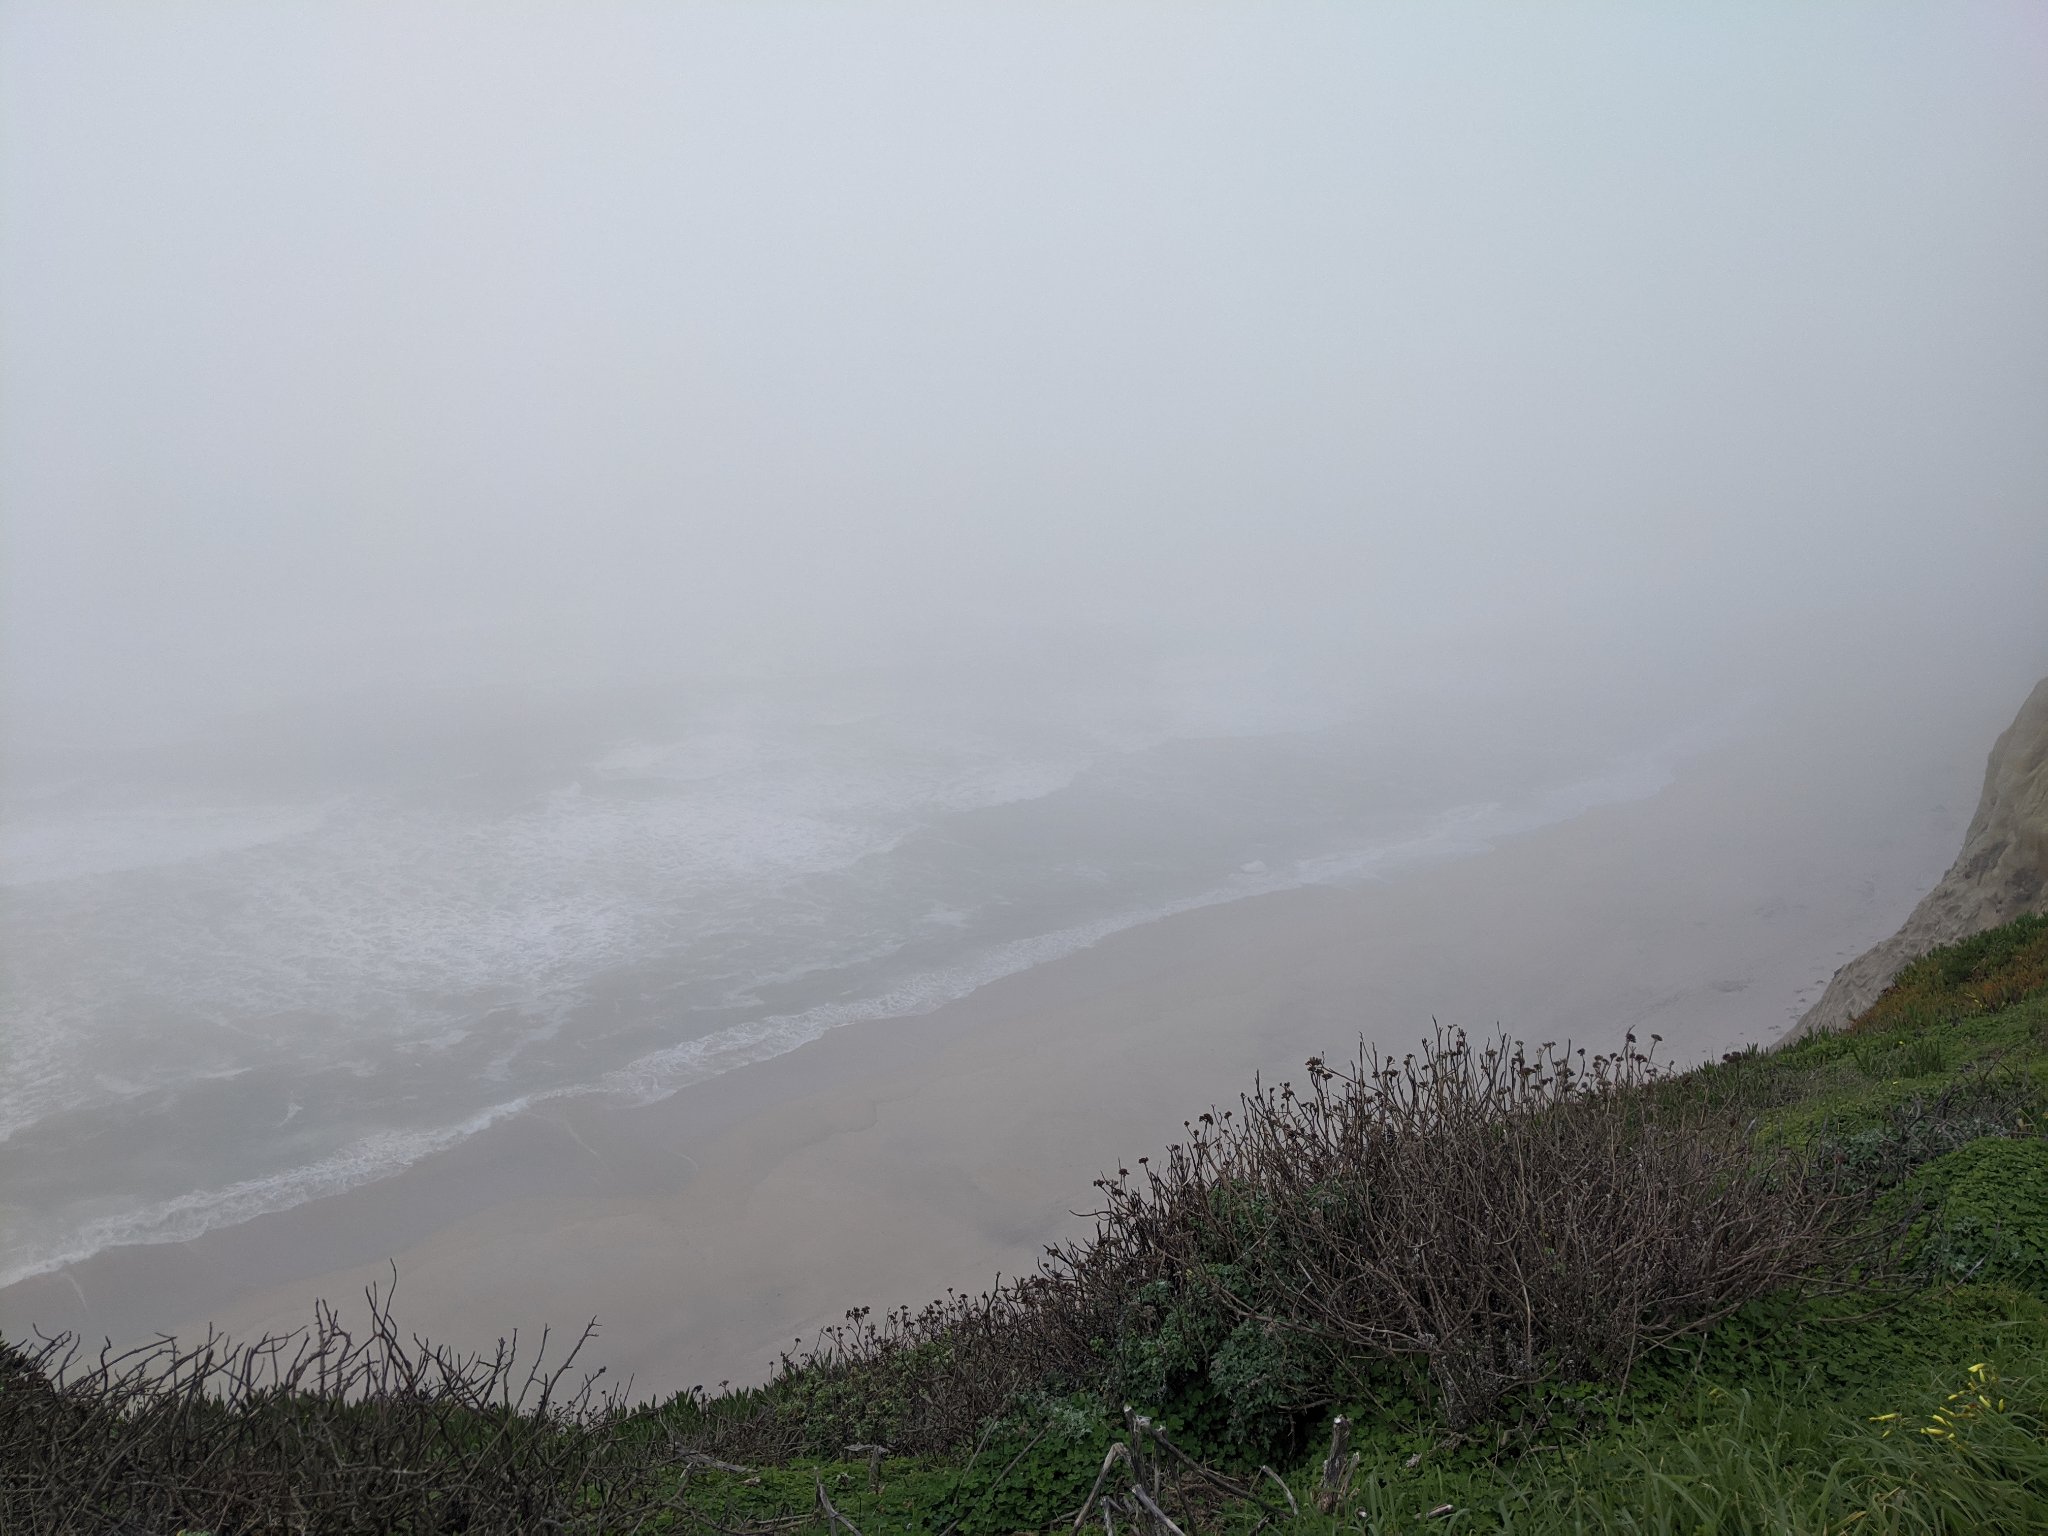 A photo of a beach taken from the top of a clif. The image is shrouded in fog, but some small waves can be seen.